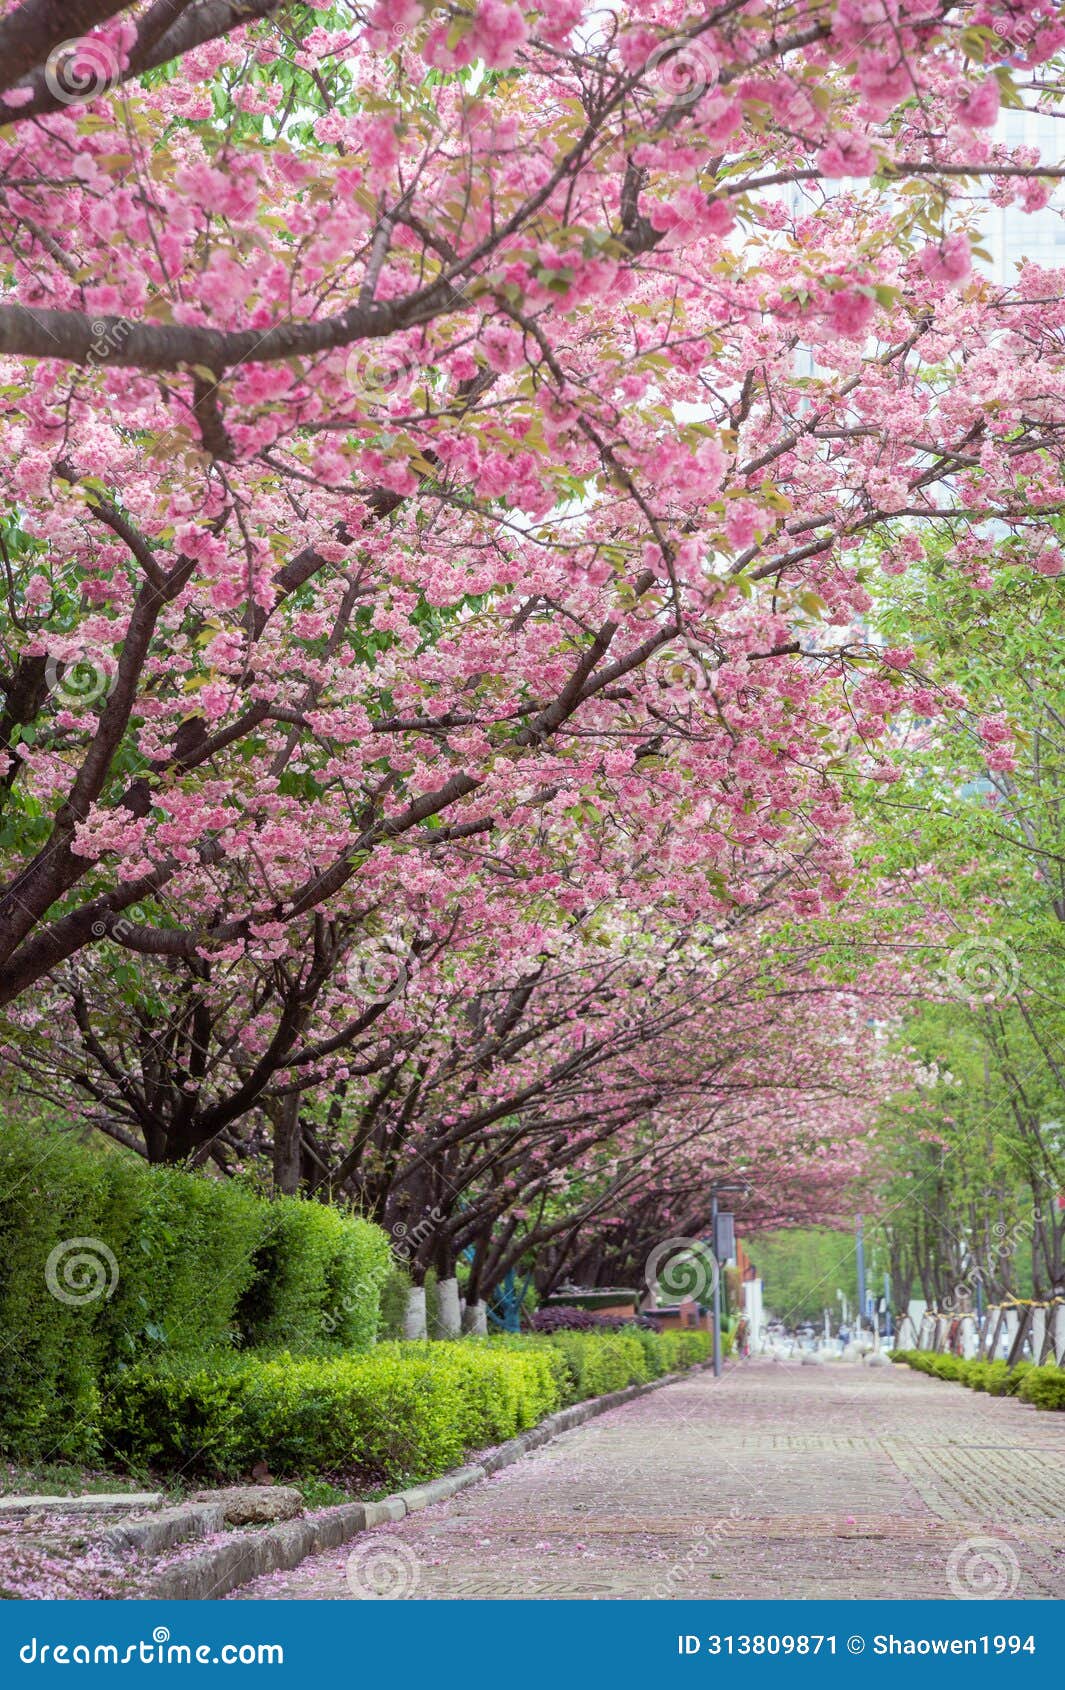 spring pink cherry blossom and footway